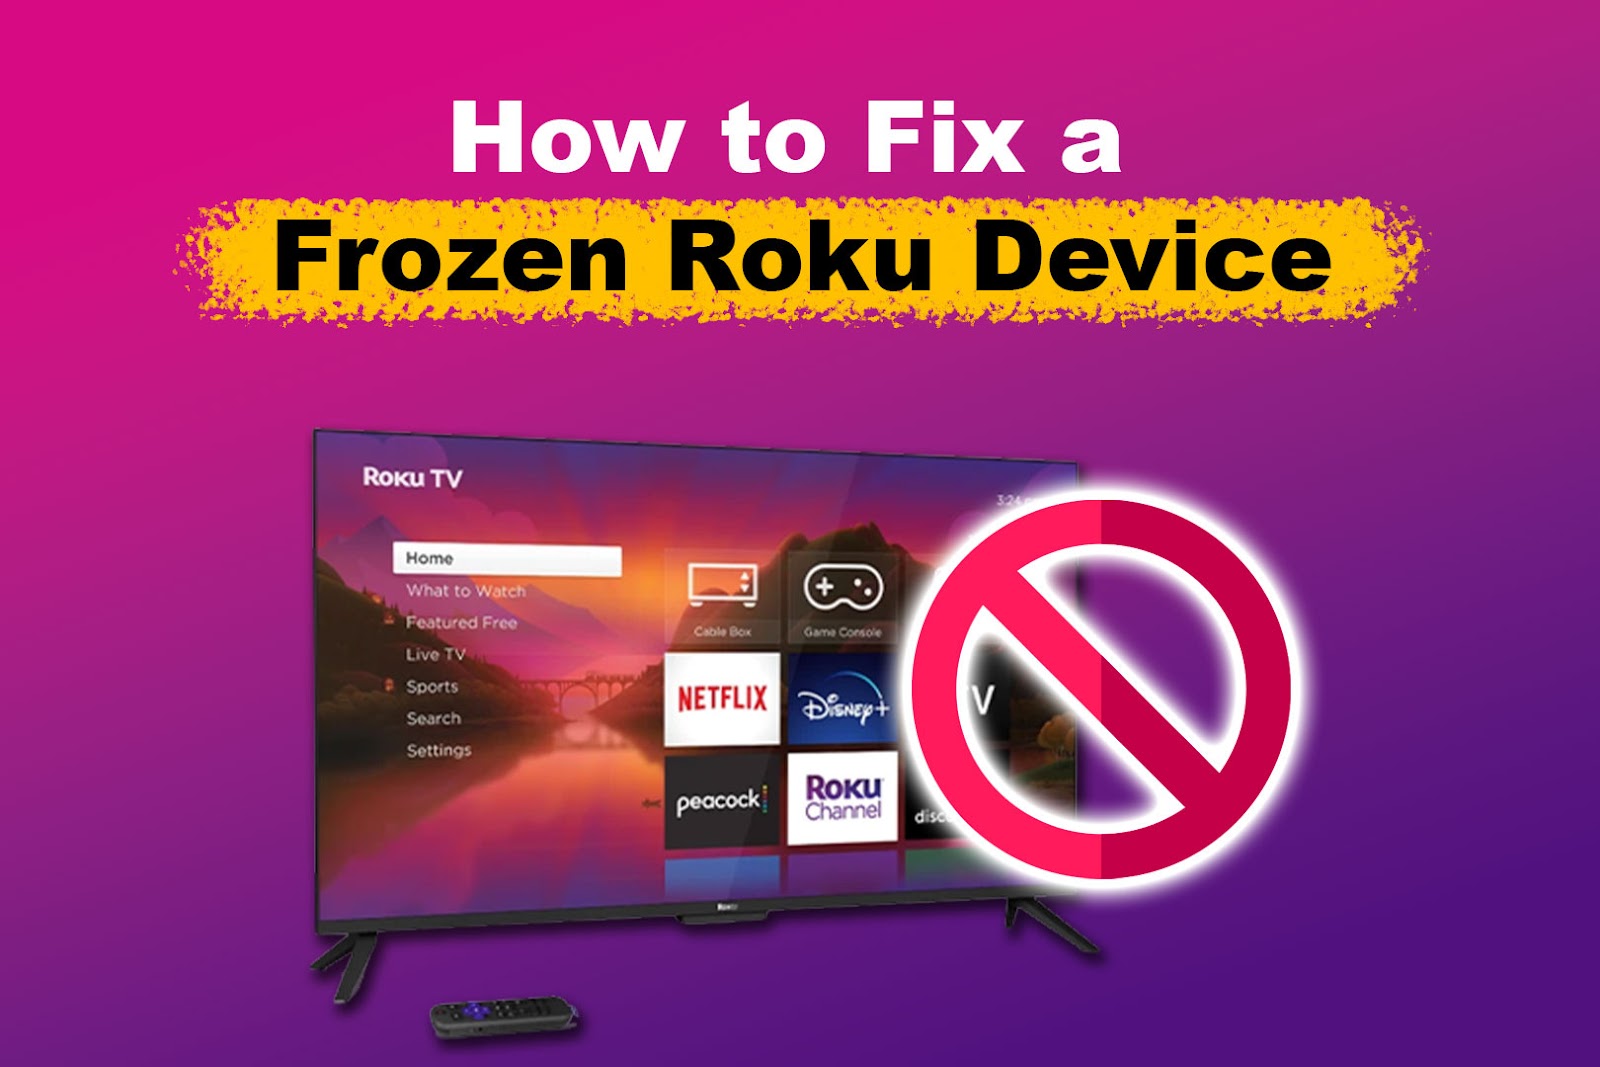 How to Fix a Frozen Roku Device